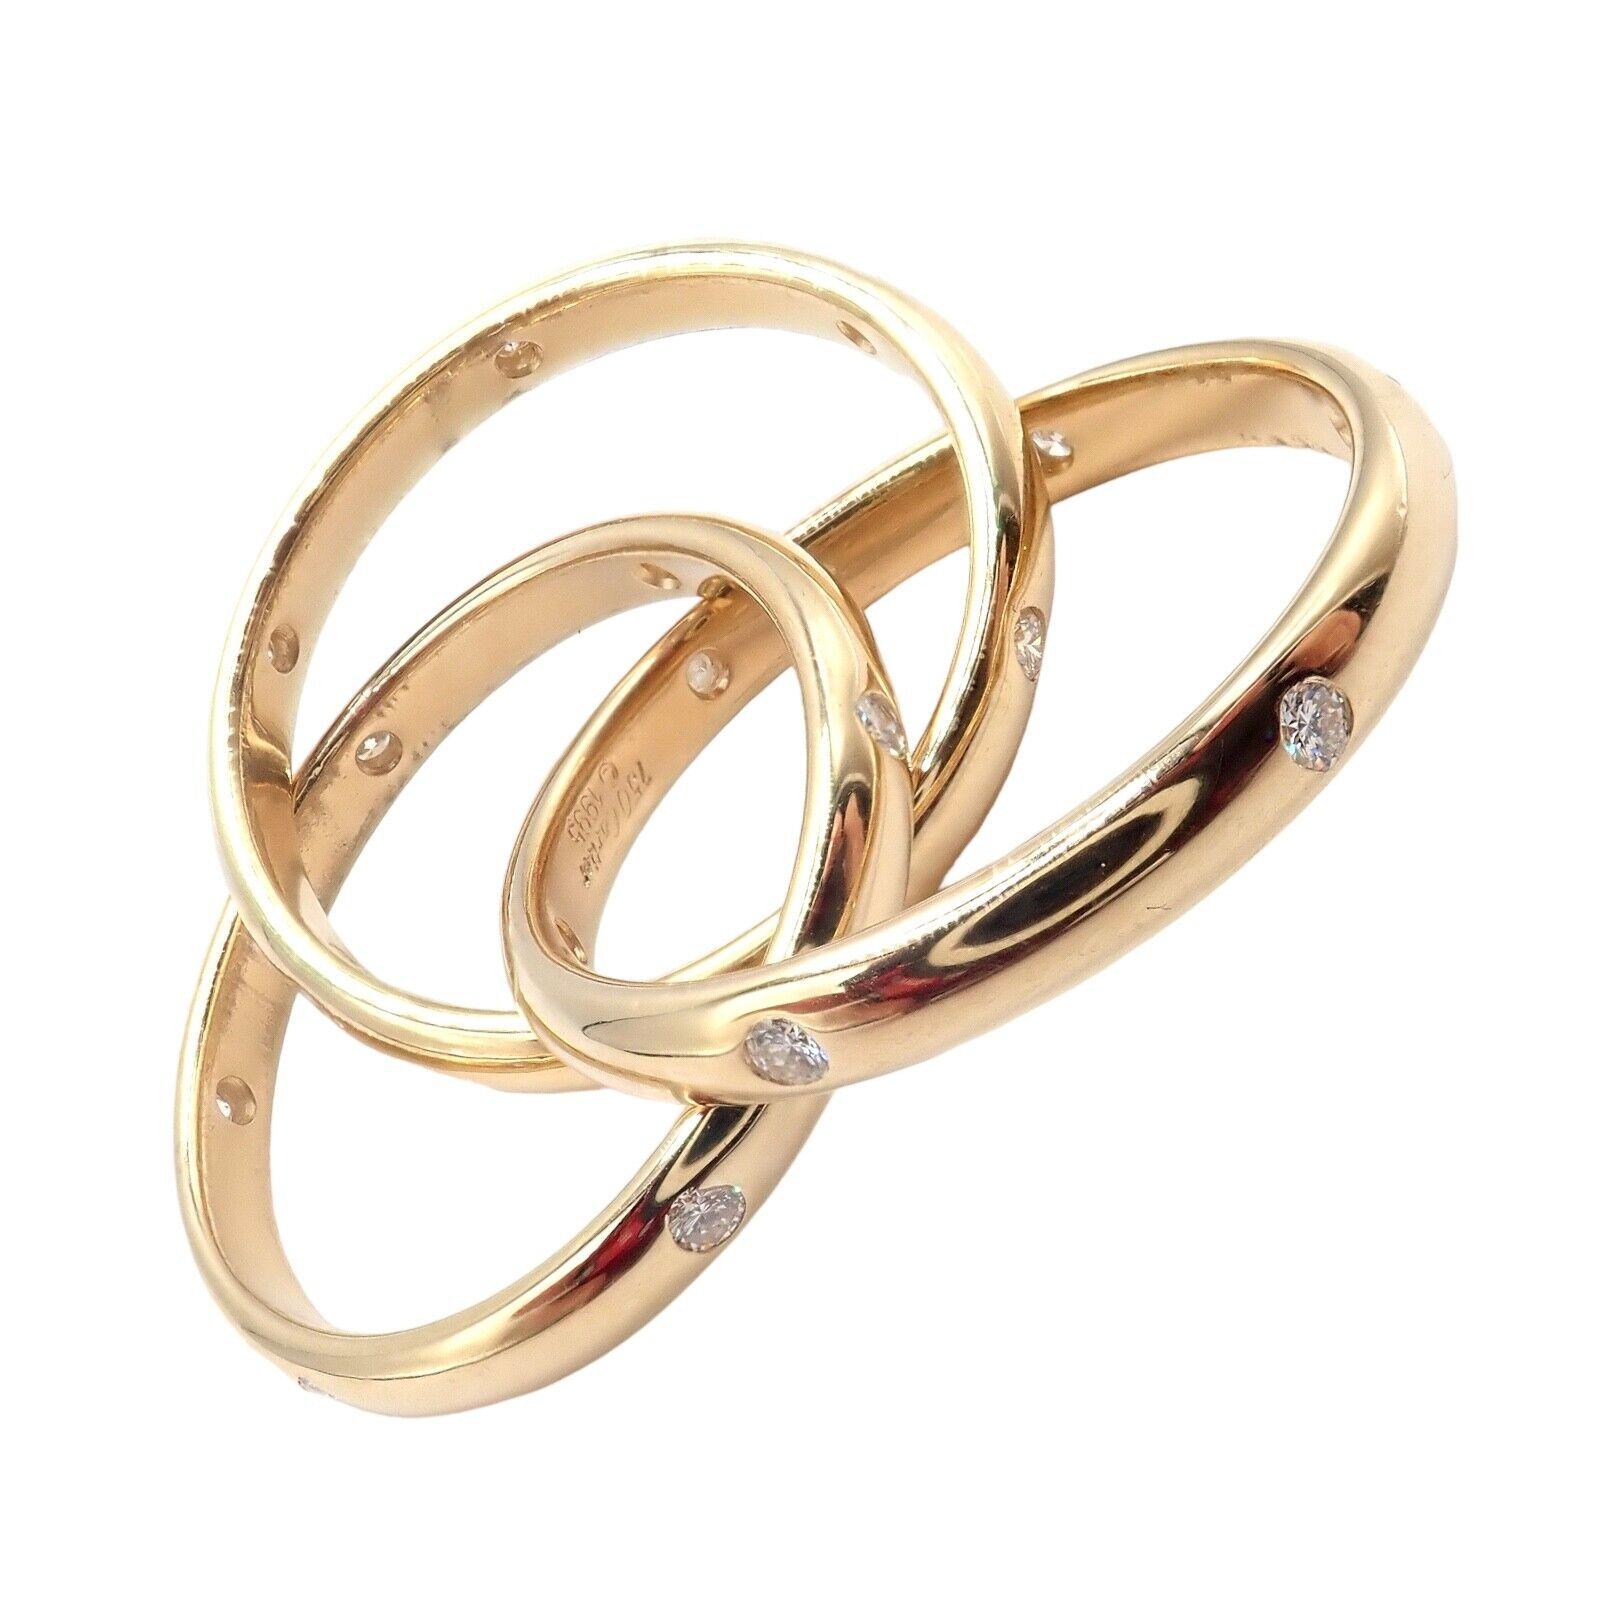 The Authentic! Cartier 18k Yellow Gold Diamond Trinity Ring is a stunning piece of jewelry. Crafted from 18k yellow gold, it features a timeless and elegant design. The ring is adorned with sparkling diamonds, adding a touch of luxury and